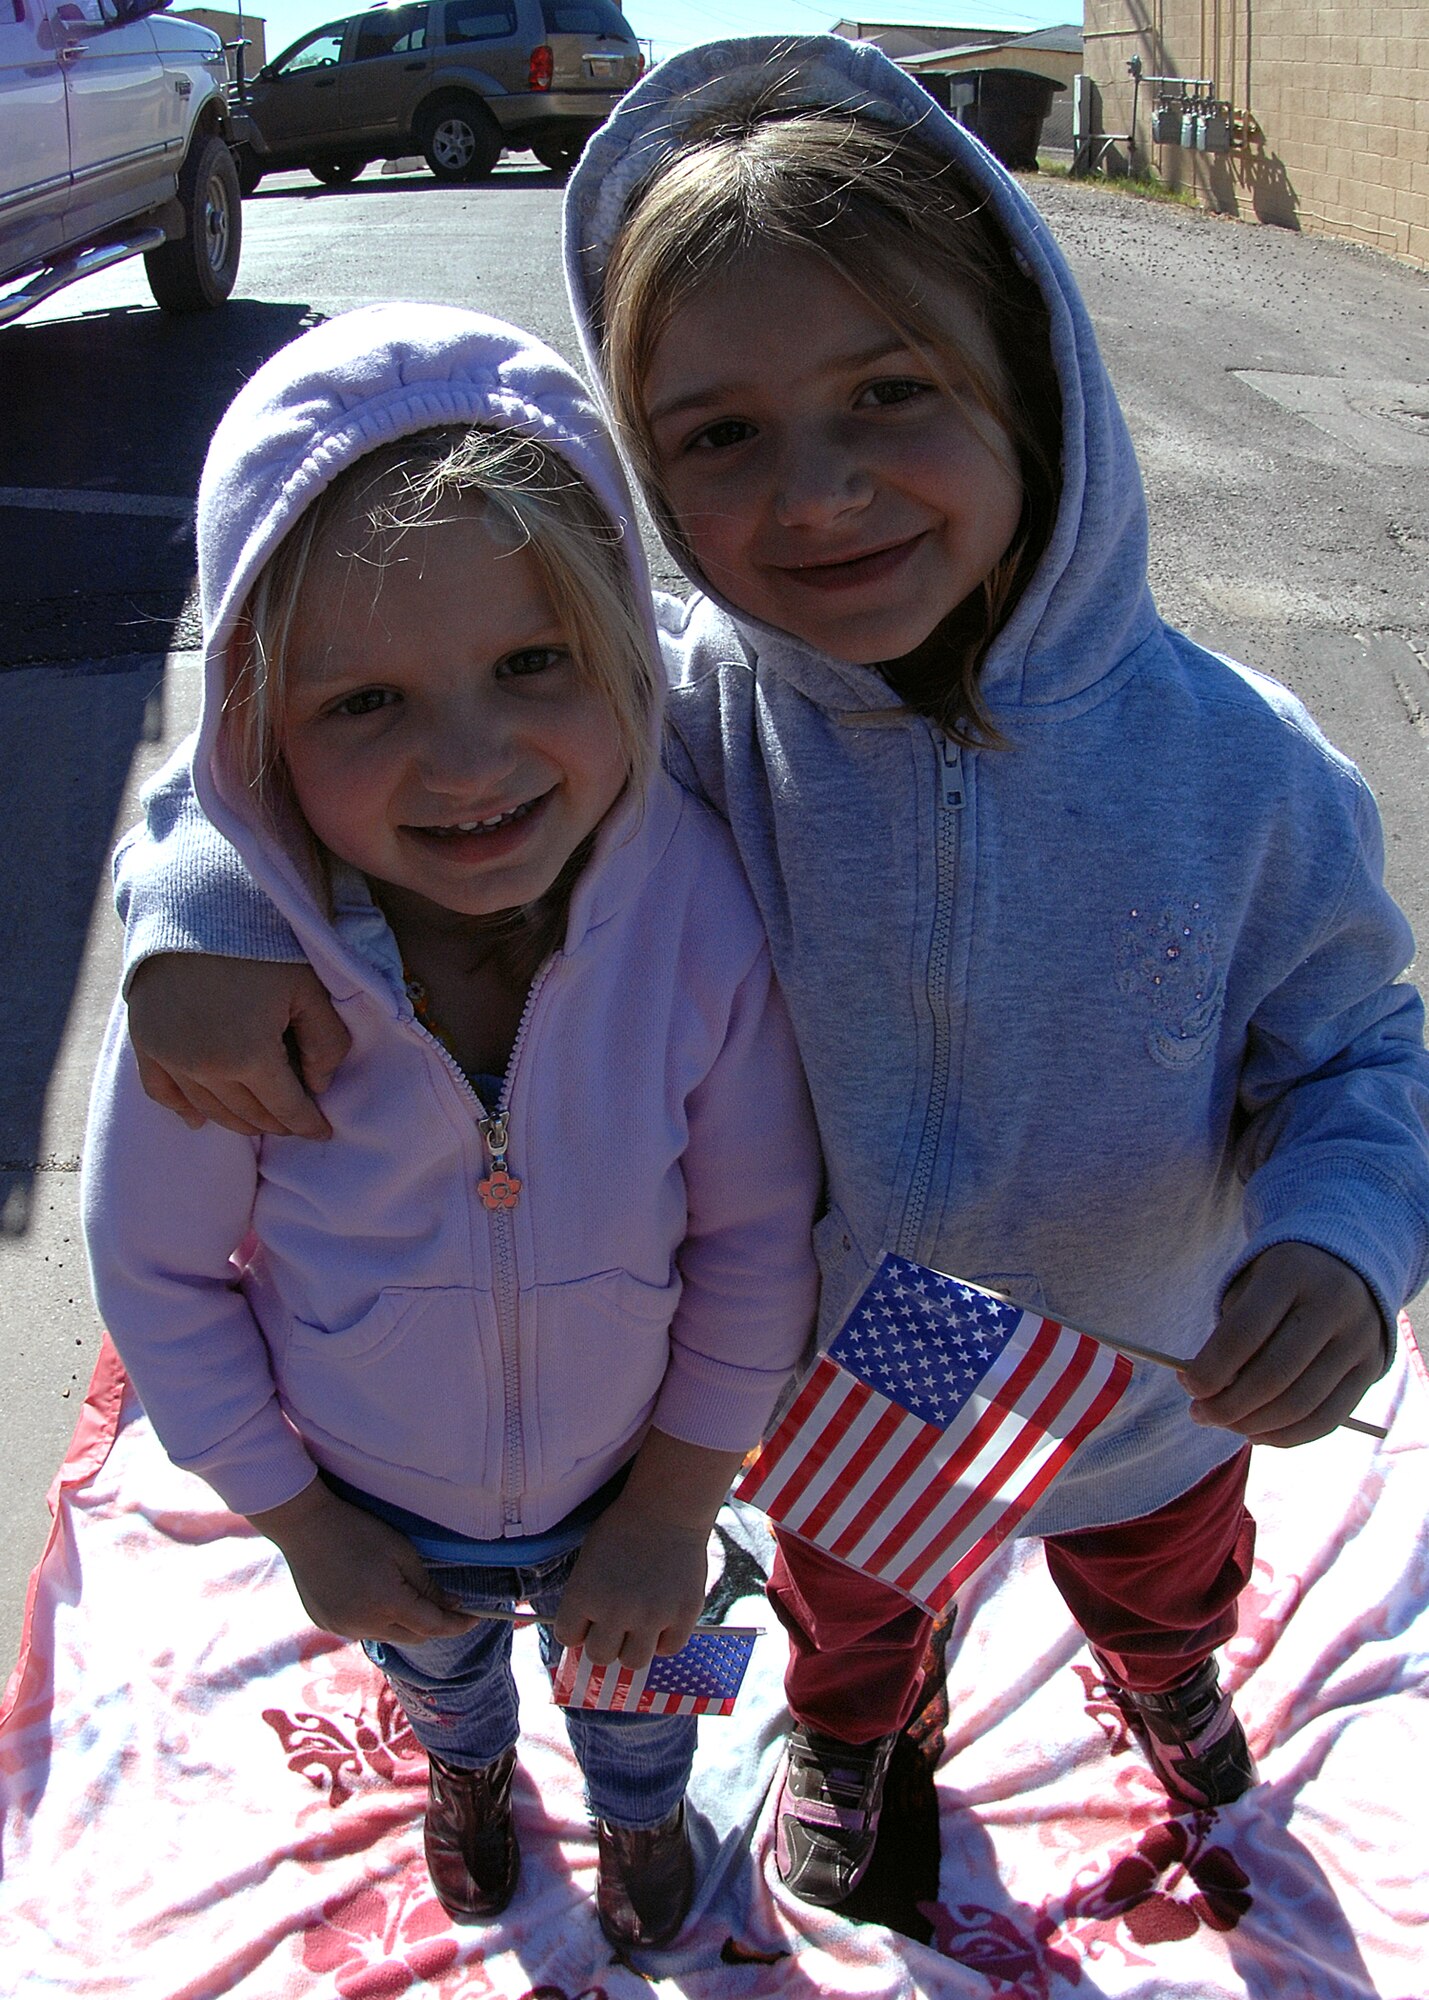 Two young children smile as military members of Otero County pass out candy during the Veterans Day parade Nov. 8, in Alamogordo, N.M.The Veterans Day National Ceremony is held Nov. 11 each year at Arlington National Cemetery. A color guard made up of members from each of the military services, renders honors to America's war dead during a tradition-rich ceremony at the Tomb of the Unkowns.



(U.S. Air Force photo/ Senior Airman Anthony Nelson)
